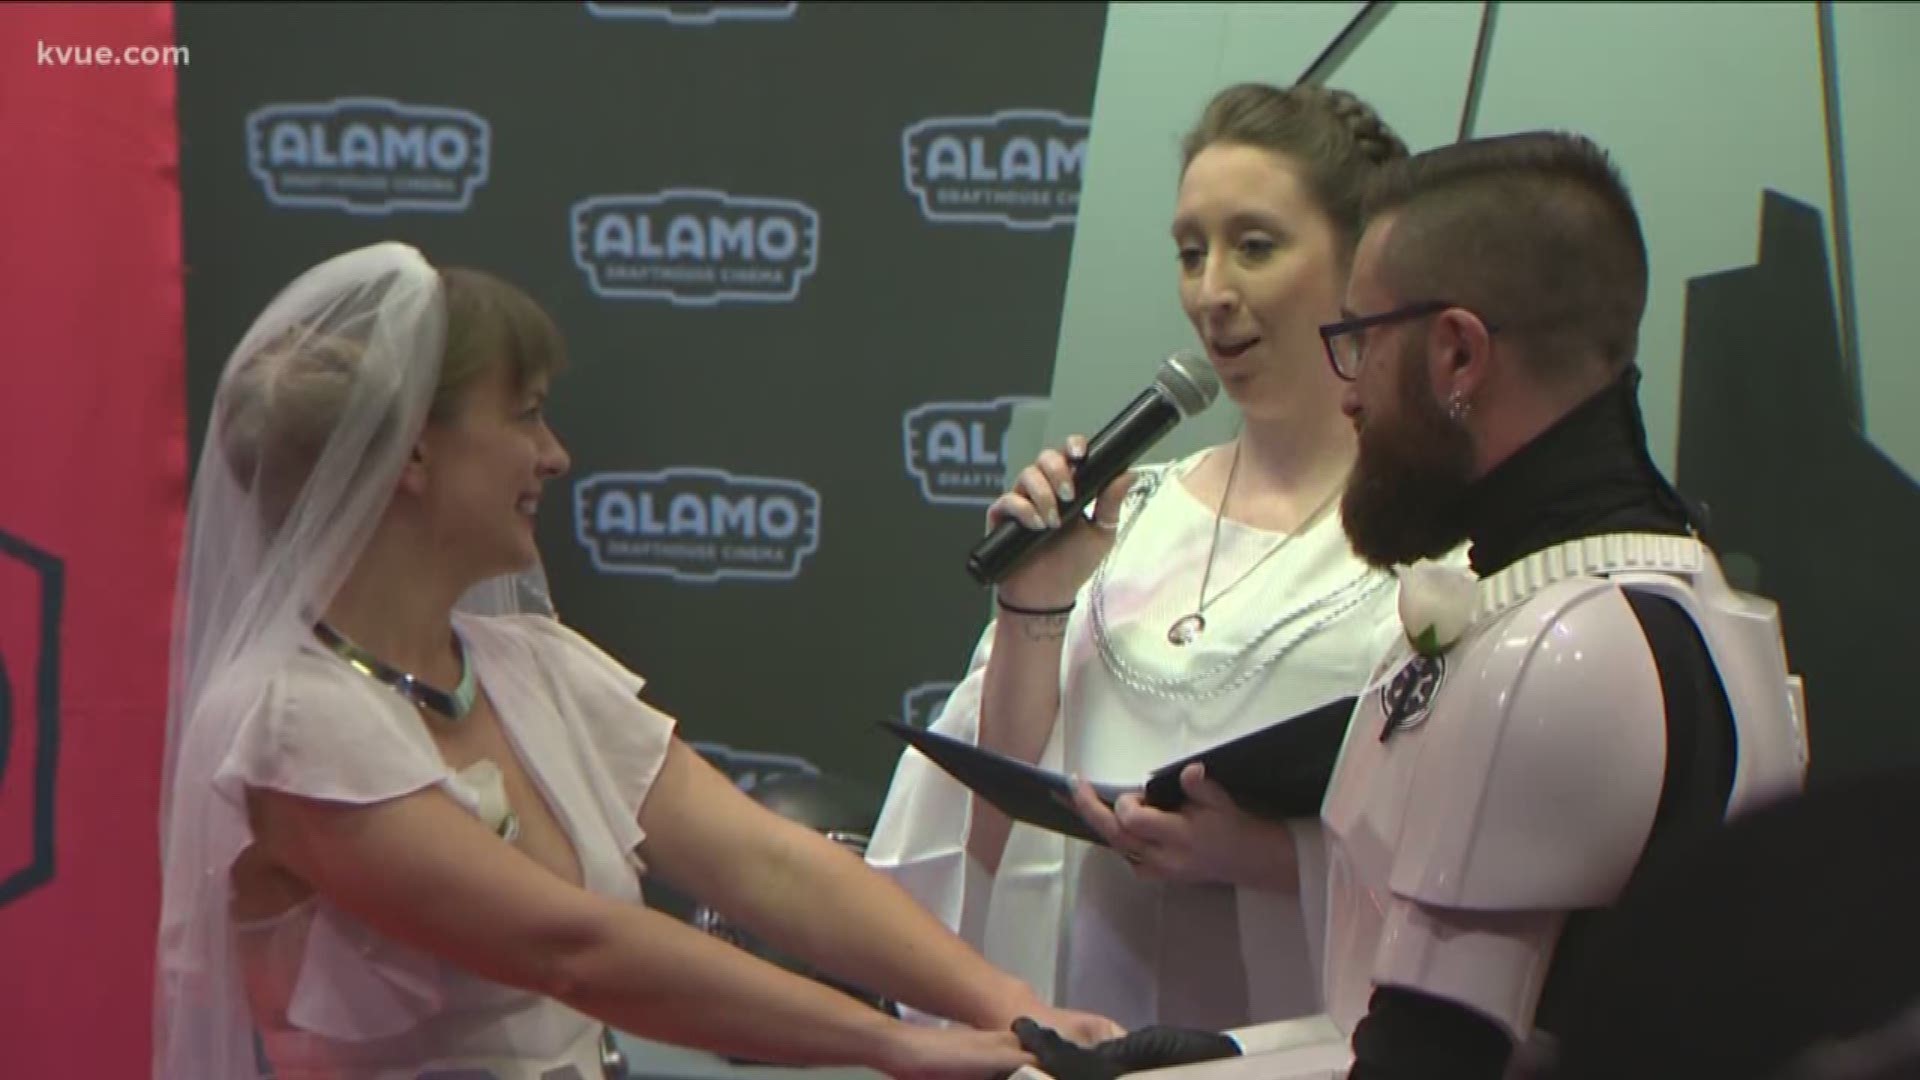 The weddings happened ahead of a screening of "Star Wars: The Rise of Skywalker" at Alamo Drafthouse.